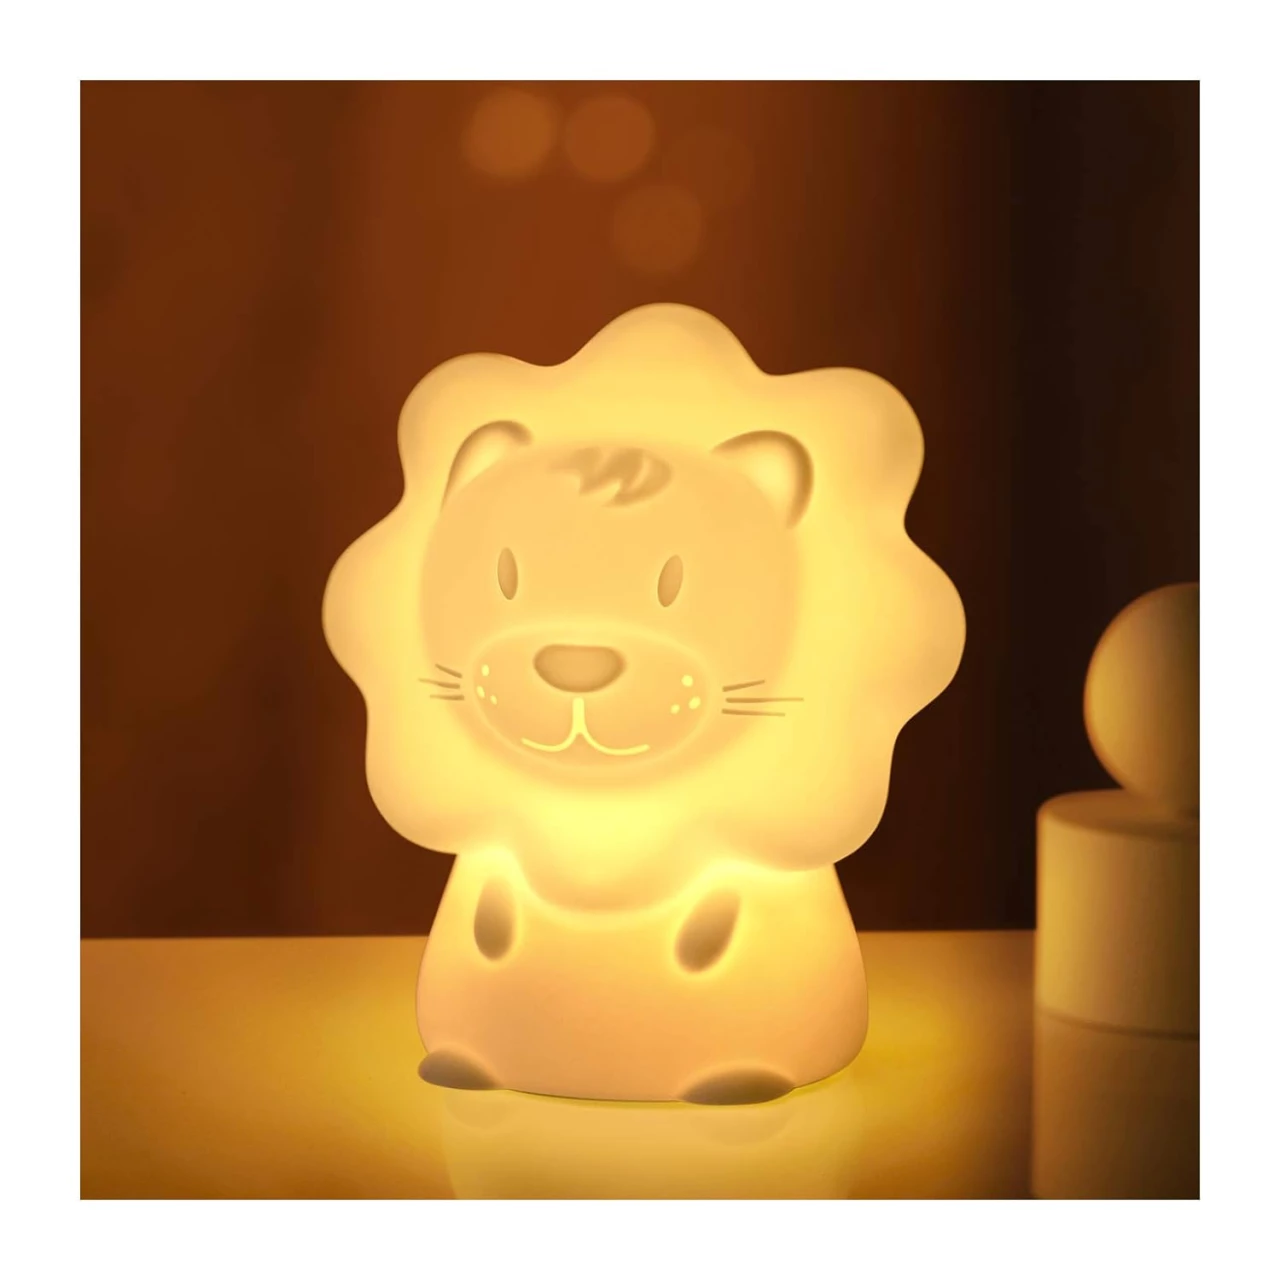 JADENS Cute Night Light for Kids – Paint Free Silicone Lion LED Nightlight, Nursery Lamp with Timer, for Toddler, Baby, Girls, Boys, Children Gift, Bedroom